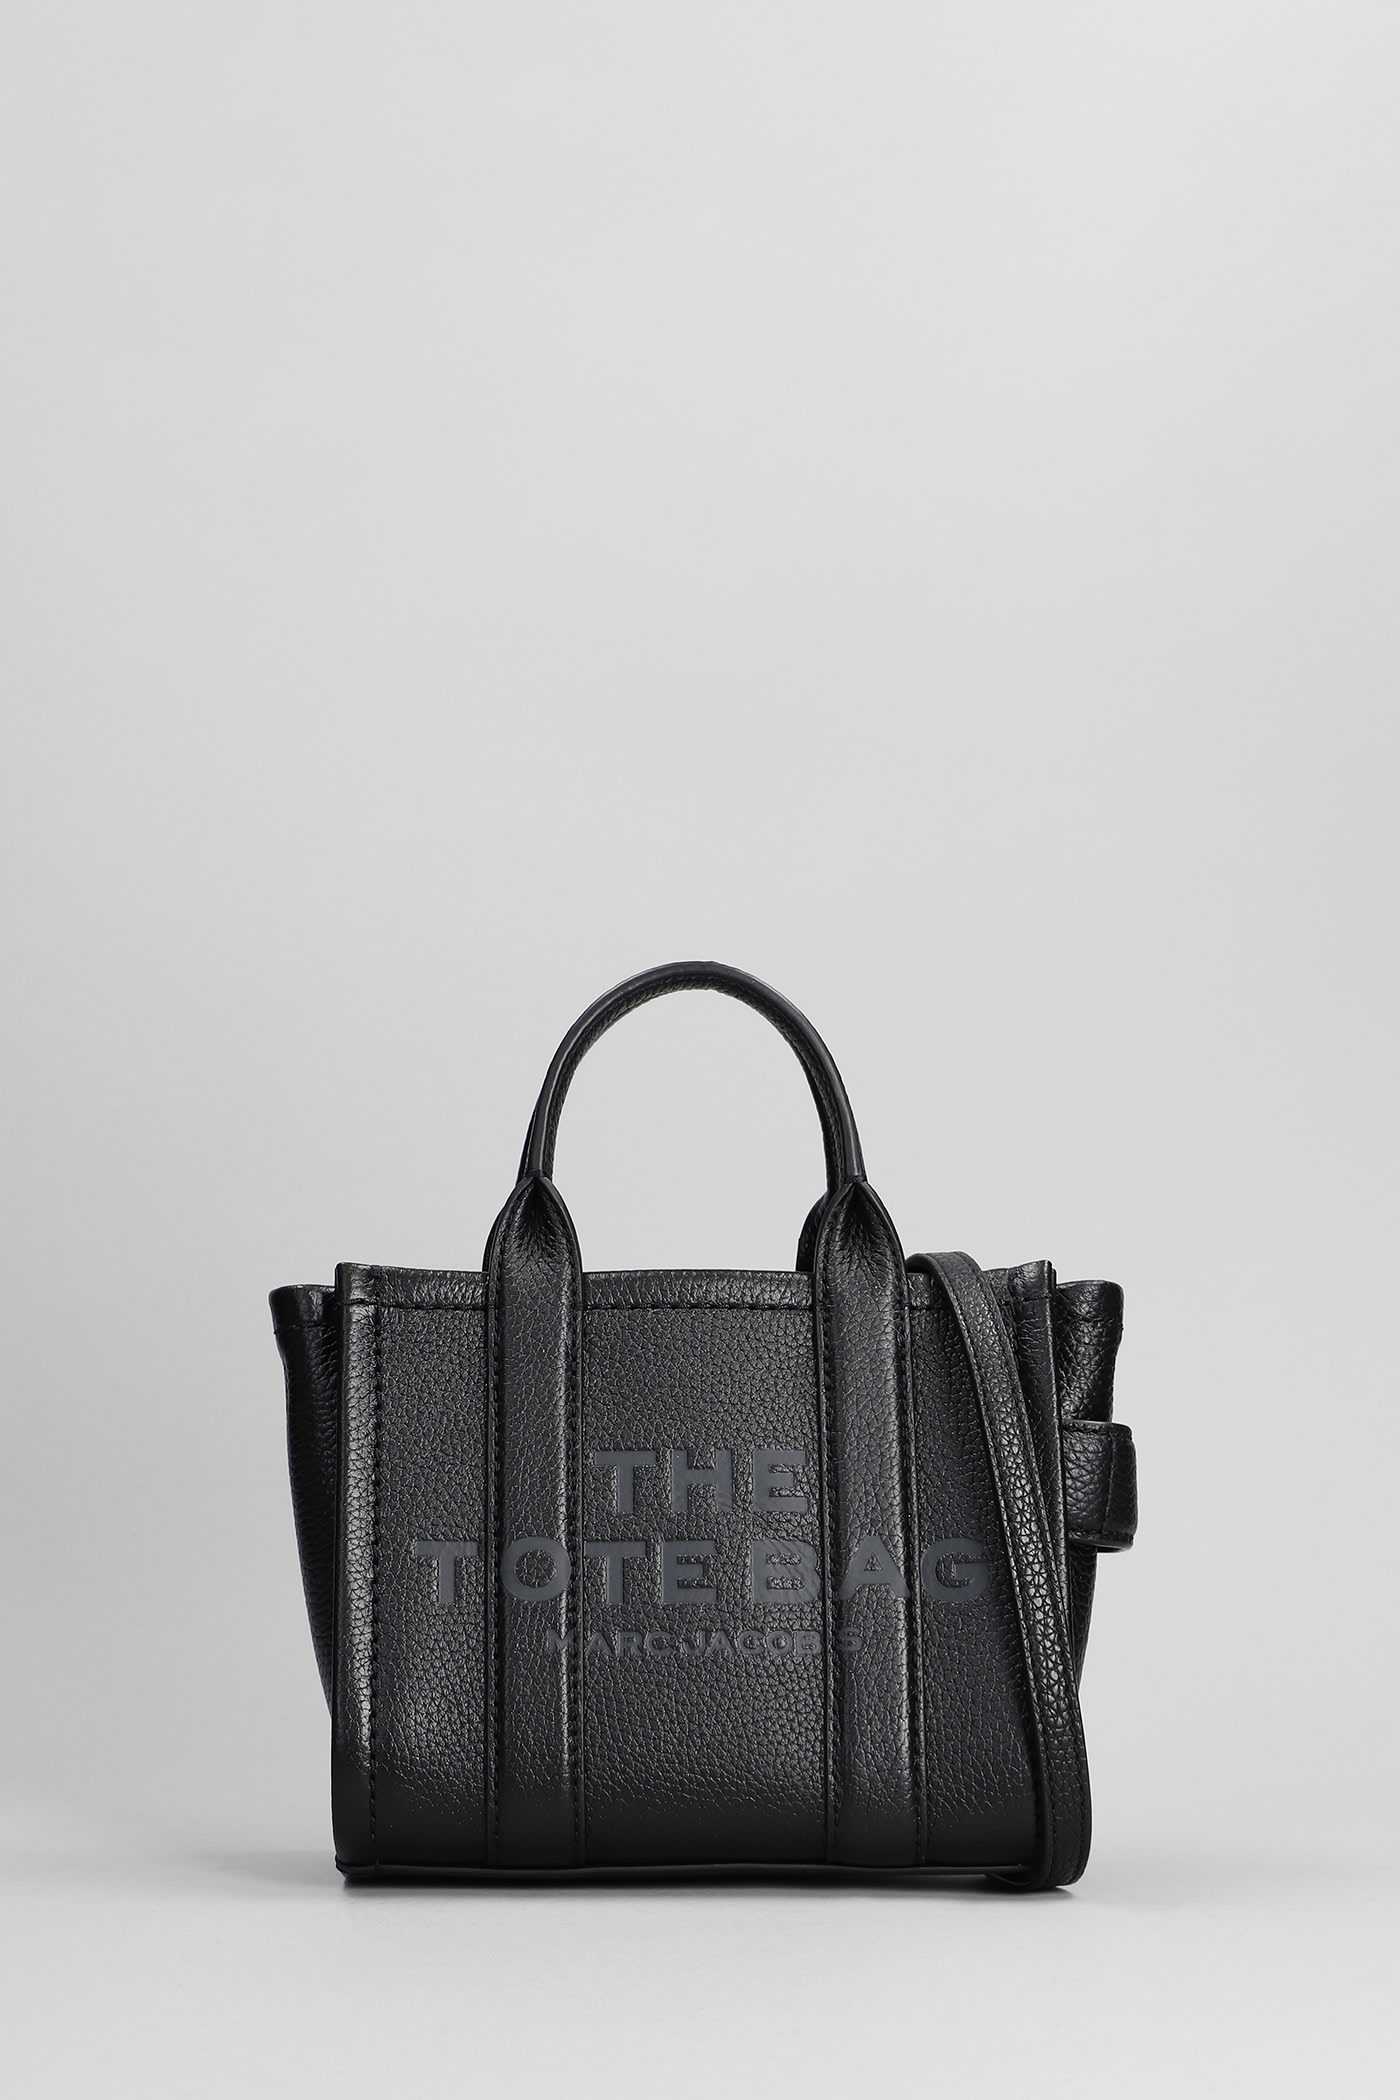 Marc Jacobs The Mini Tote Tote In Black Leather